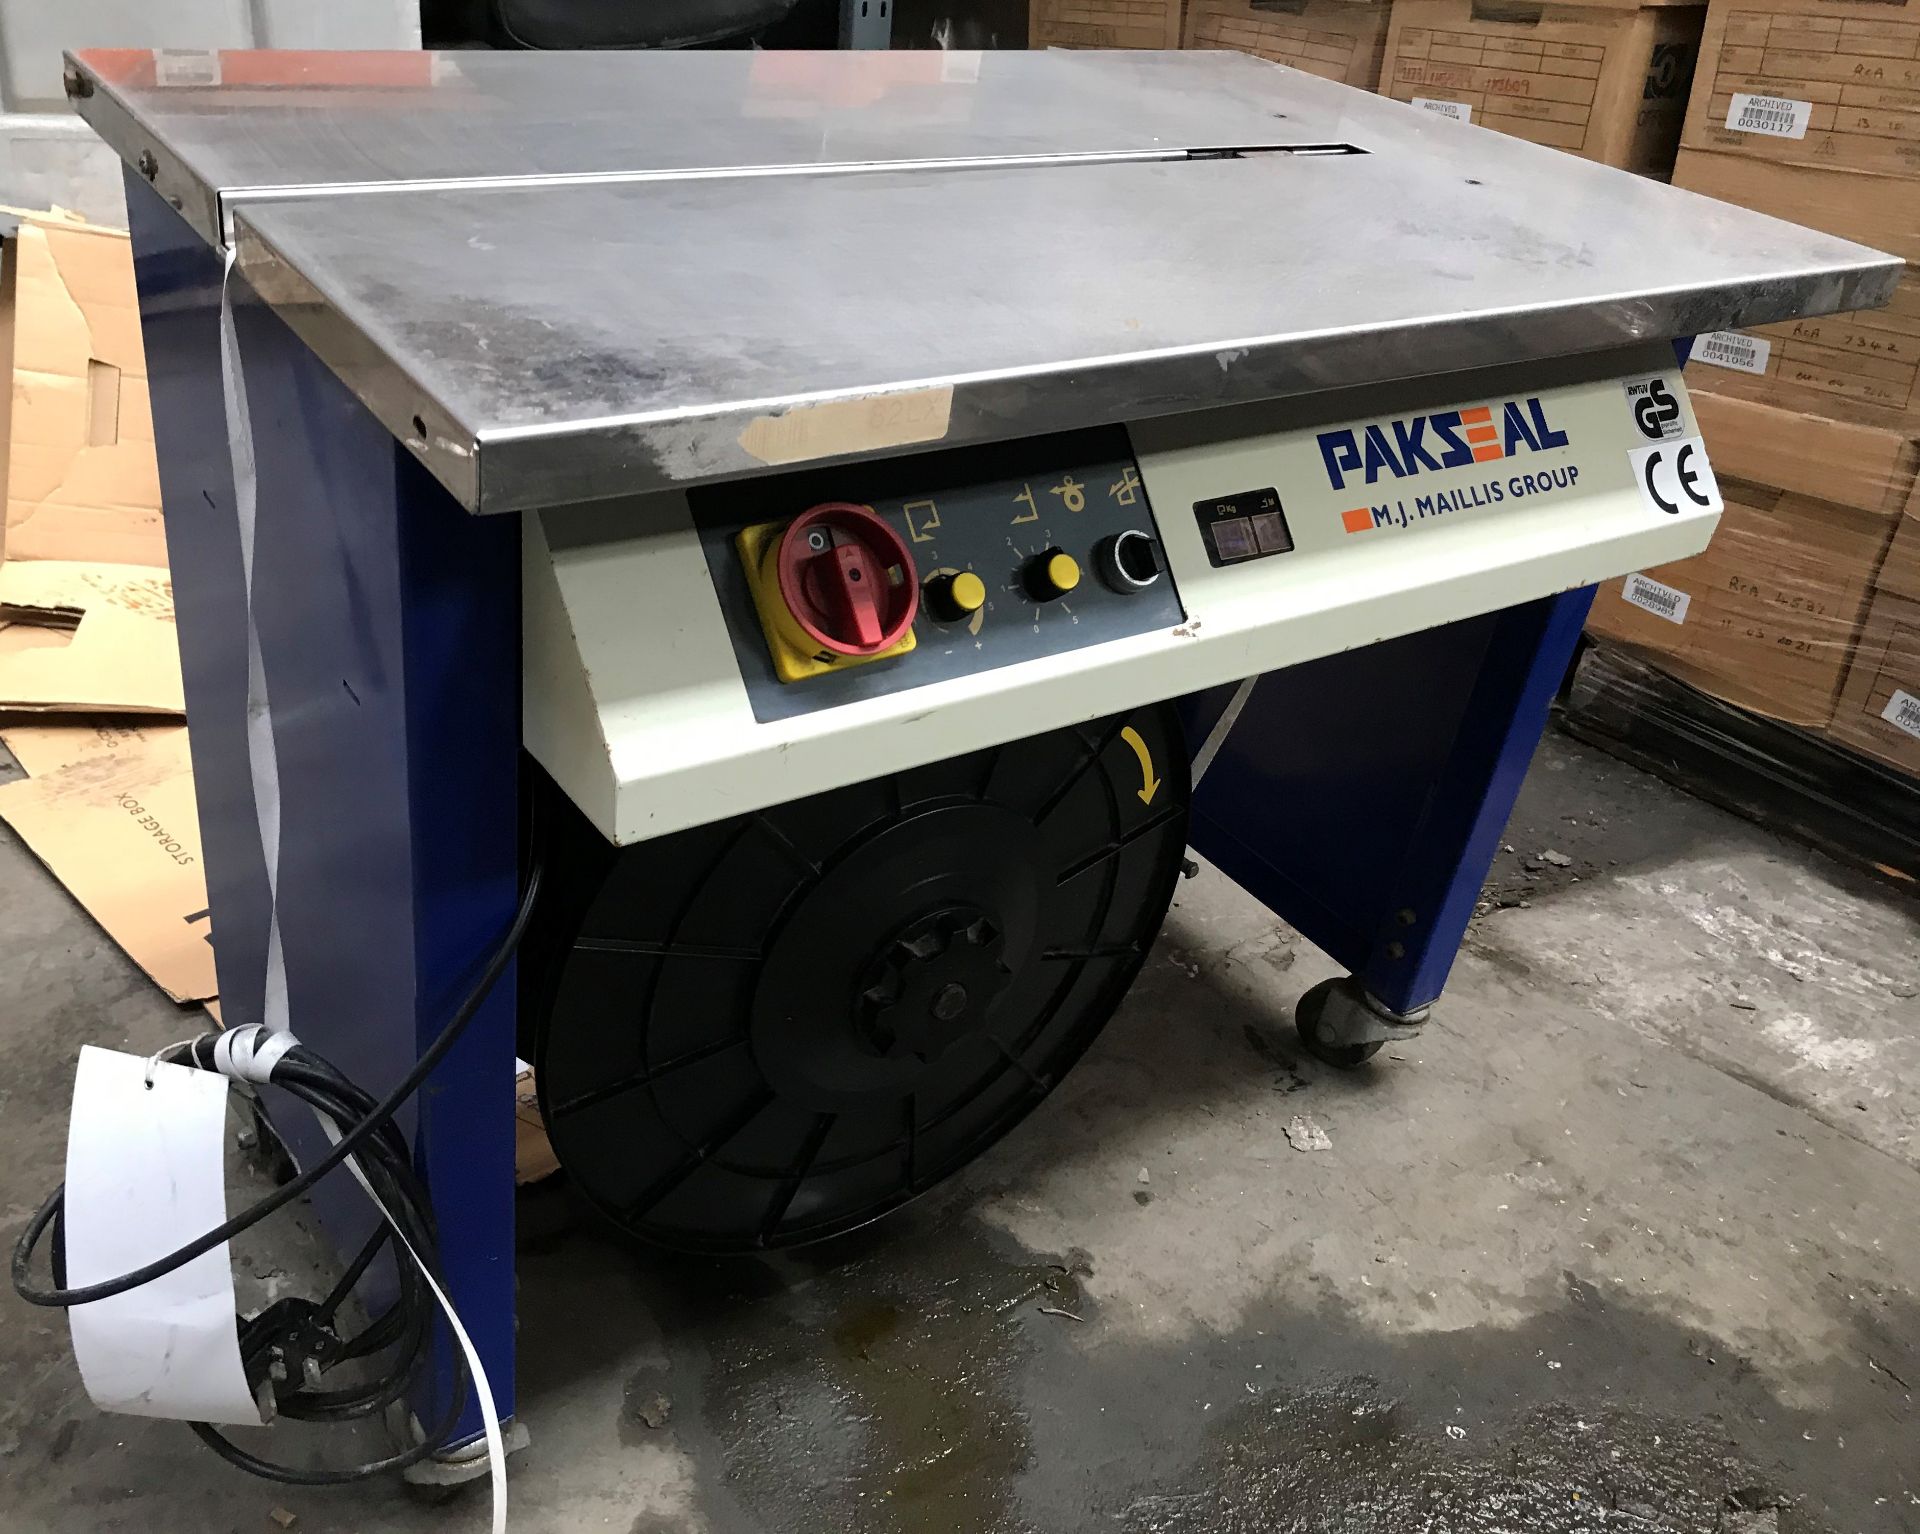 An MJ Maillis PAKSEAL Model PSA3000E Mobile Box Strapping Machine No.104111224, 85kg weight, 240v ( - Image 2 of 3